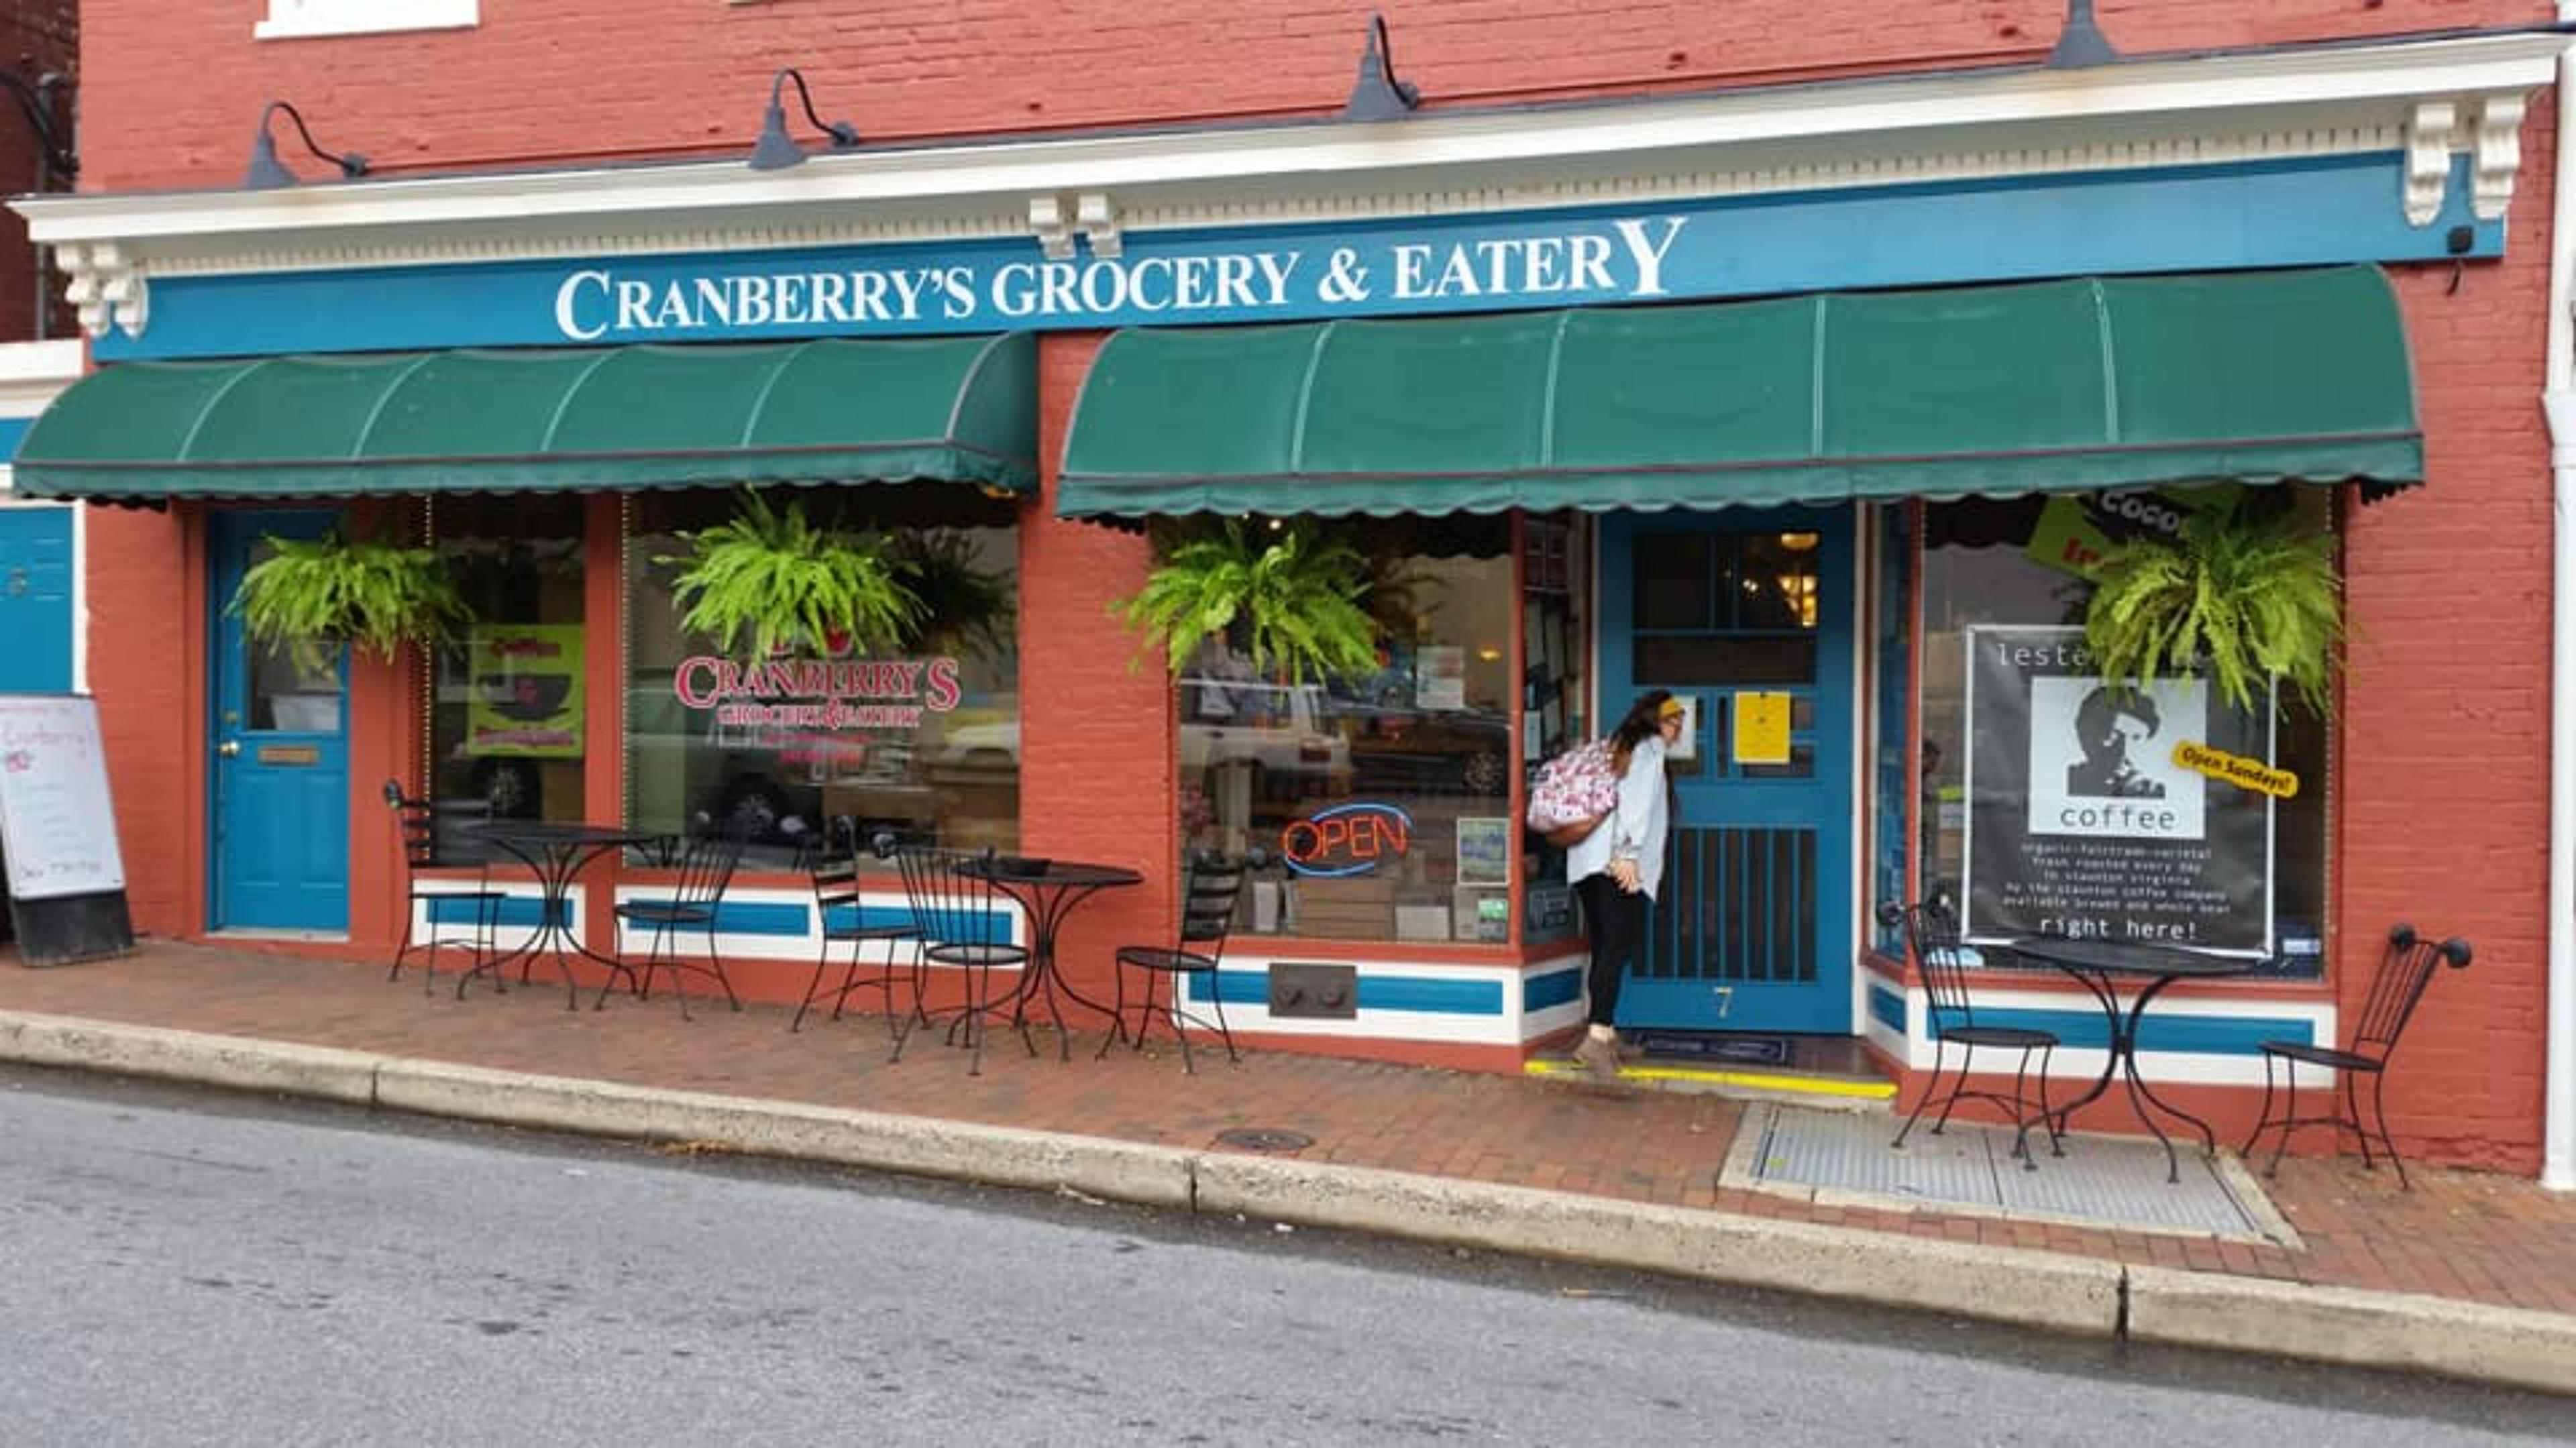 Cranberry's Grocery & Eatery